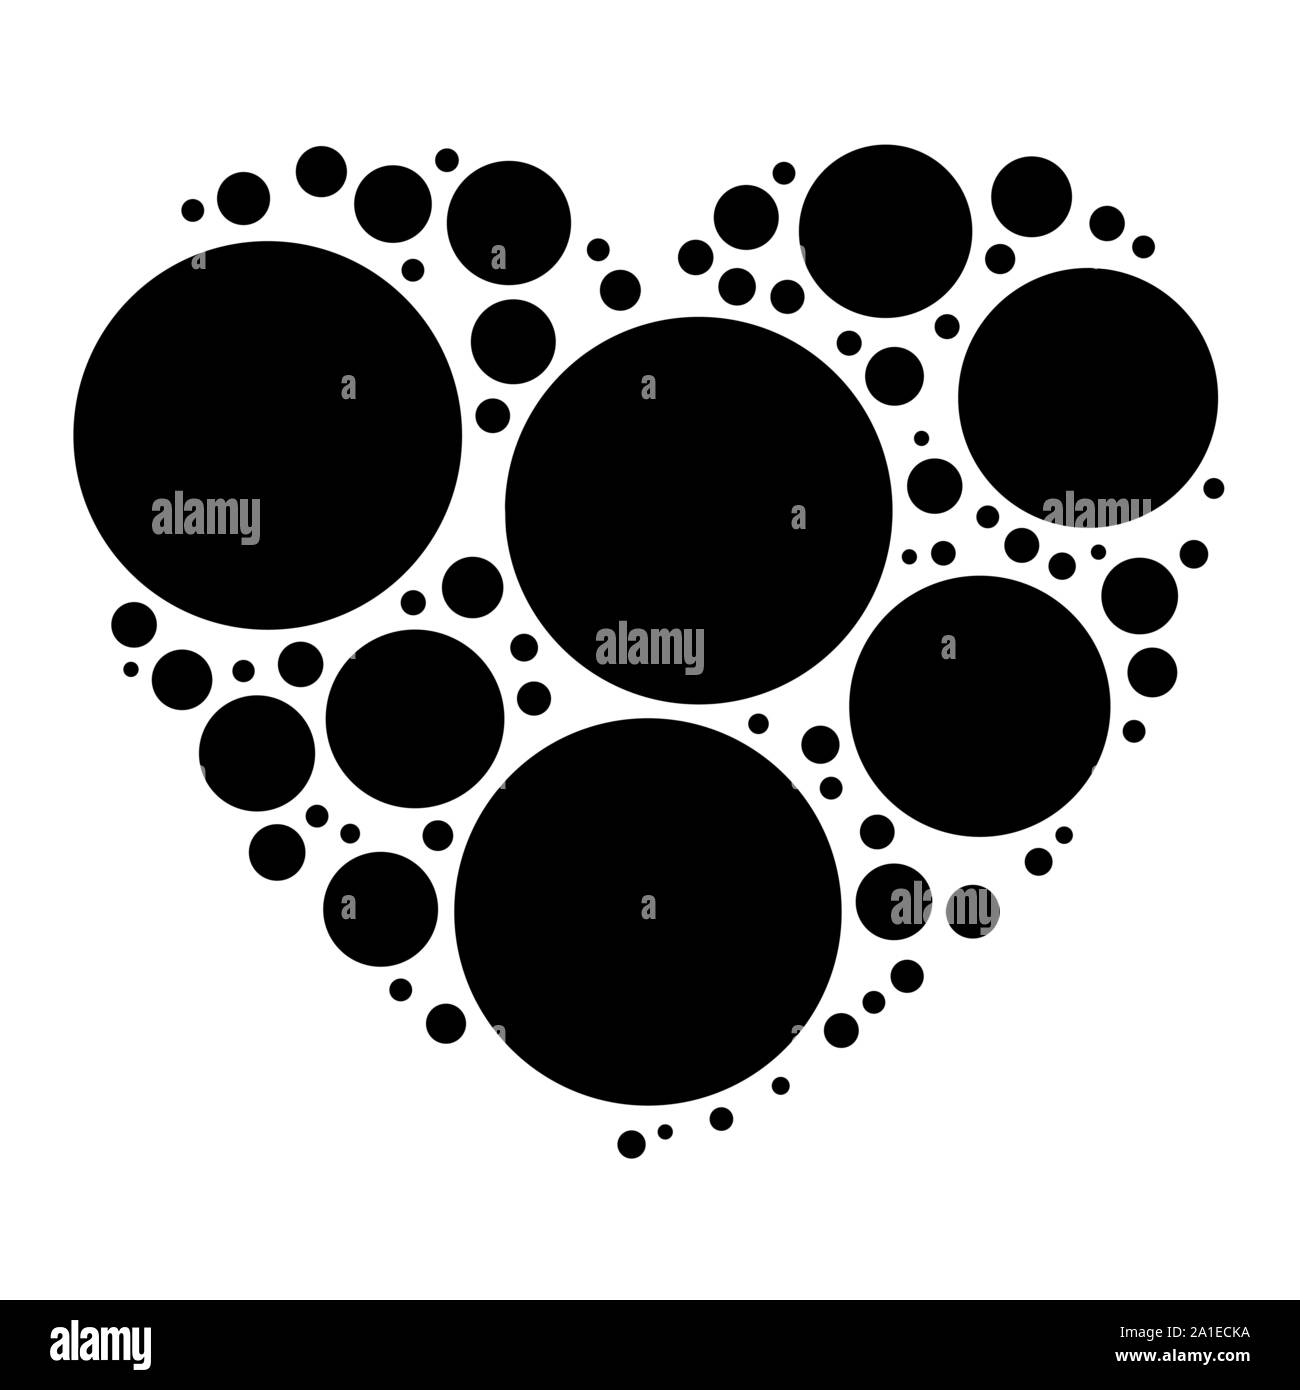 Unique heart element. Heart made of circles. Clip-art for love, affection, marriage heart health concepts Stock Vector